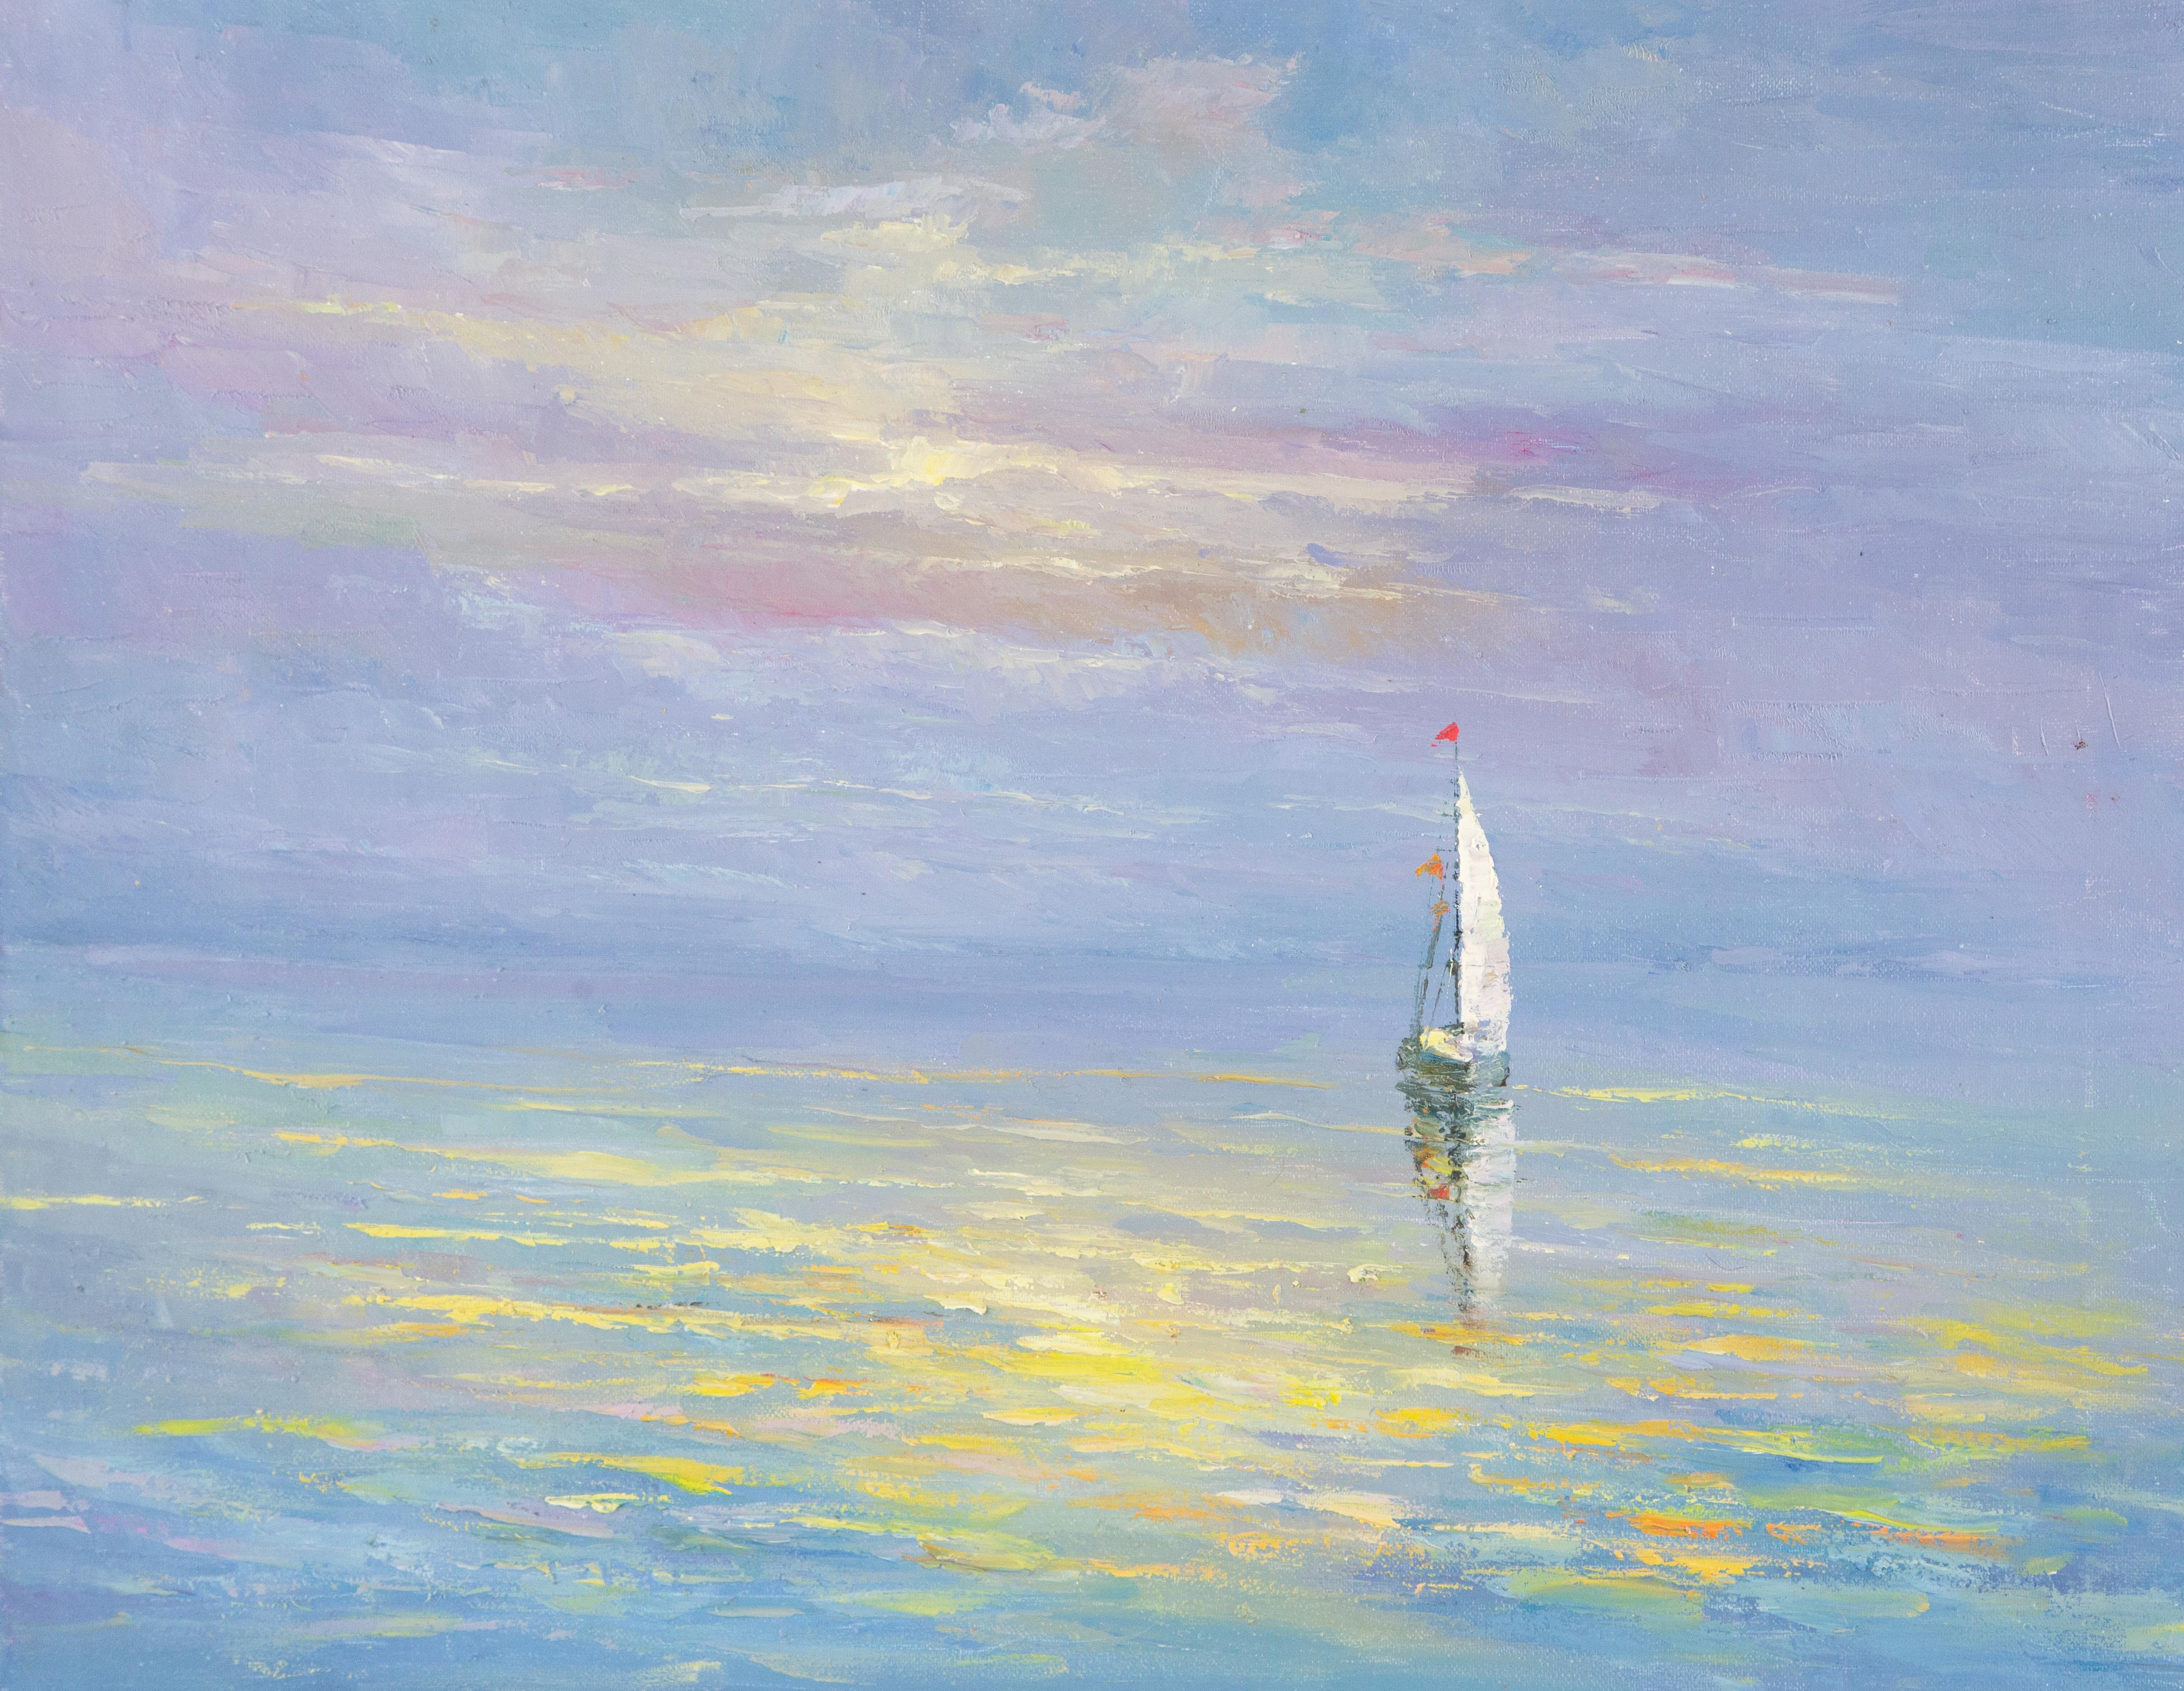  Title: Sailboat
 Medium: Oil on canvas
 Size: 15.25 x 19.25 inches
 Frame: Framing options available!
 Condition: The painting appears to be in excellent condition.
 Note: This painting is unstretched
 Year: 2015
 Artist: Jiwei Chen
 Signature: